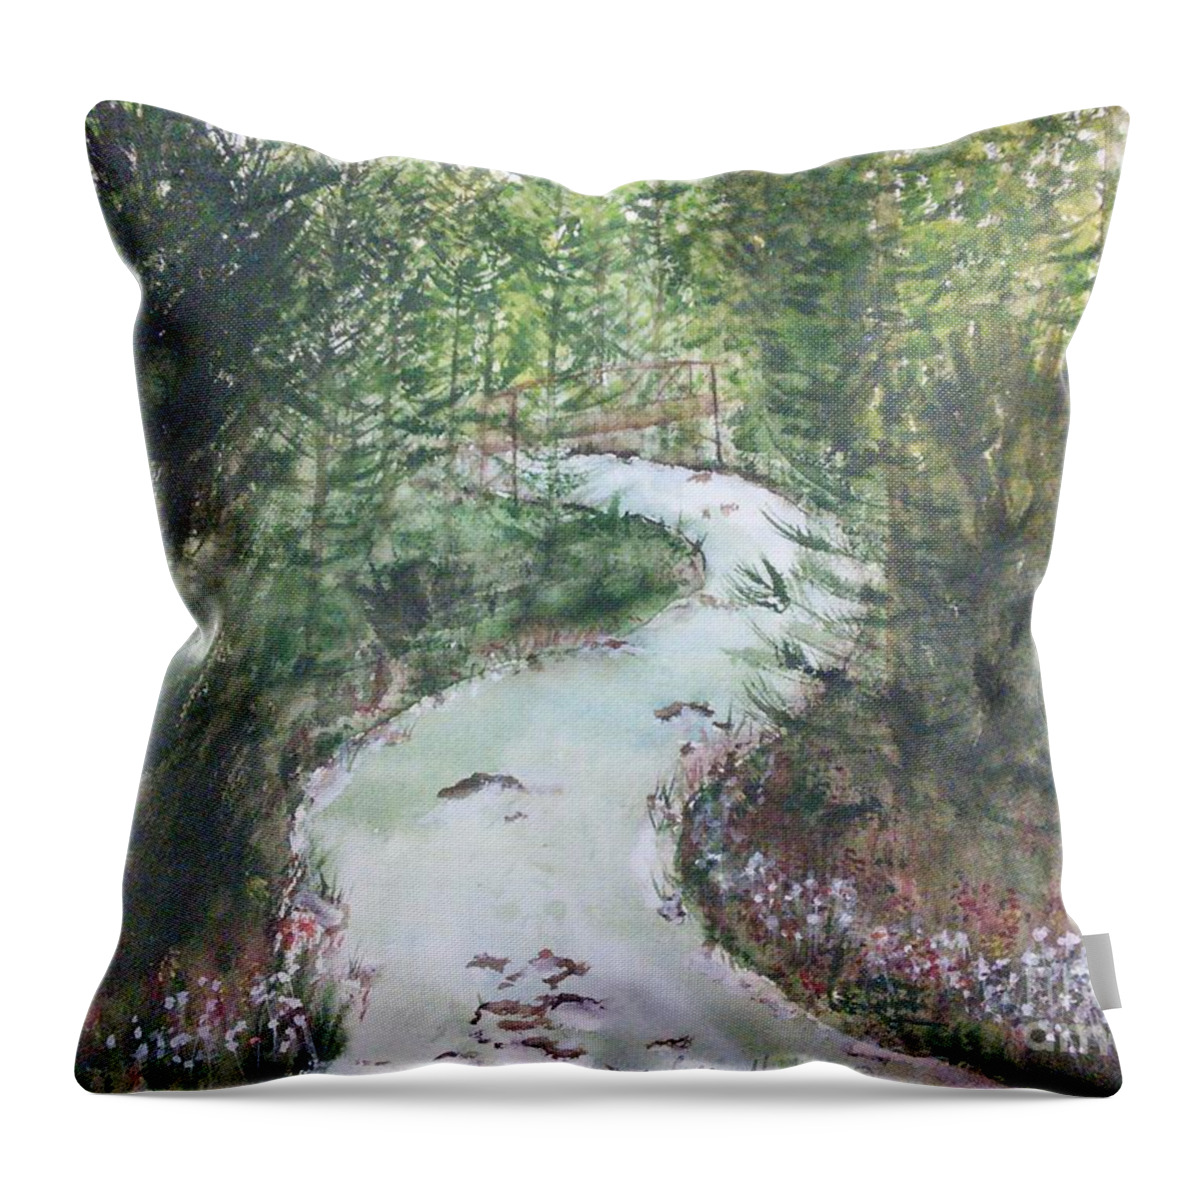 Lovely Throw Pillow featuring the painting A Stream Runs Through It by Susan Nielsen